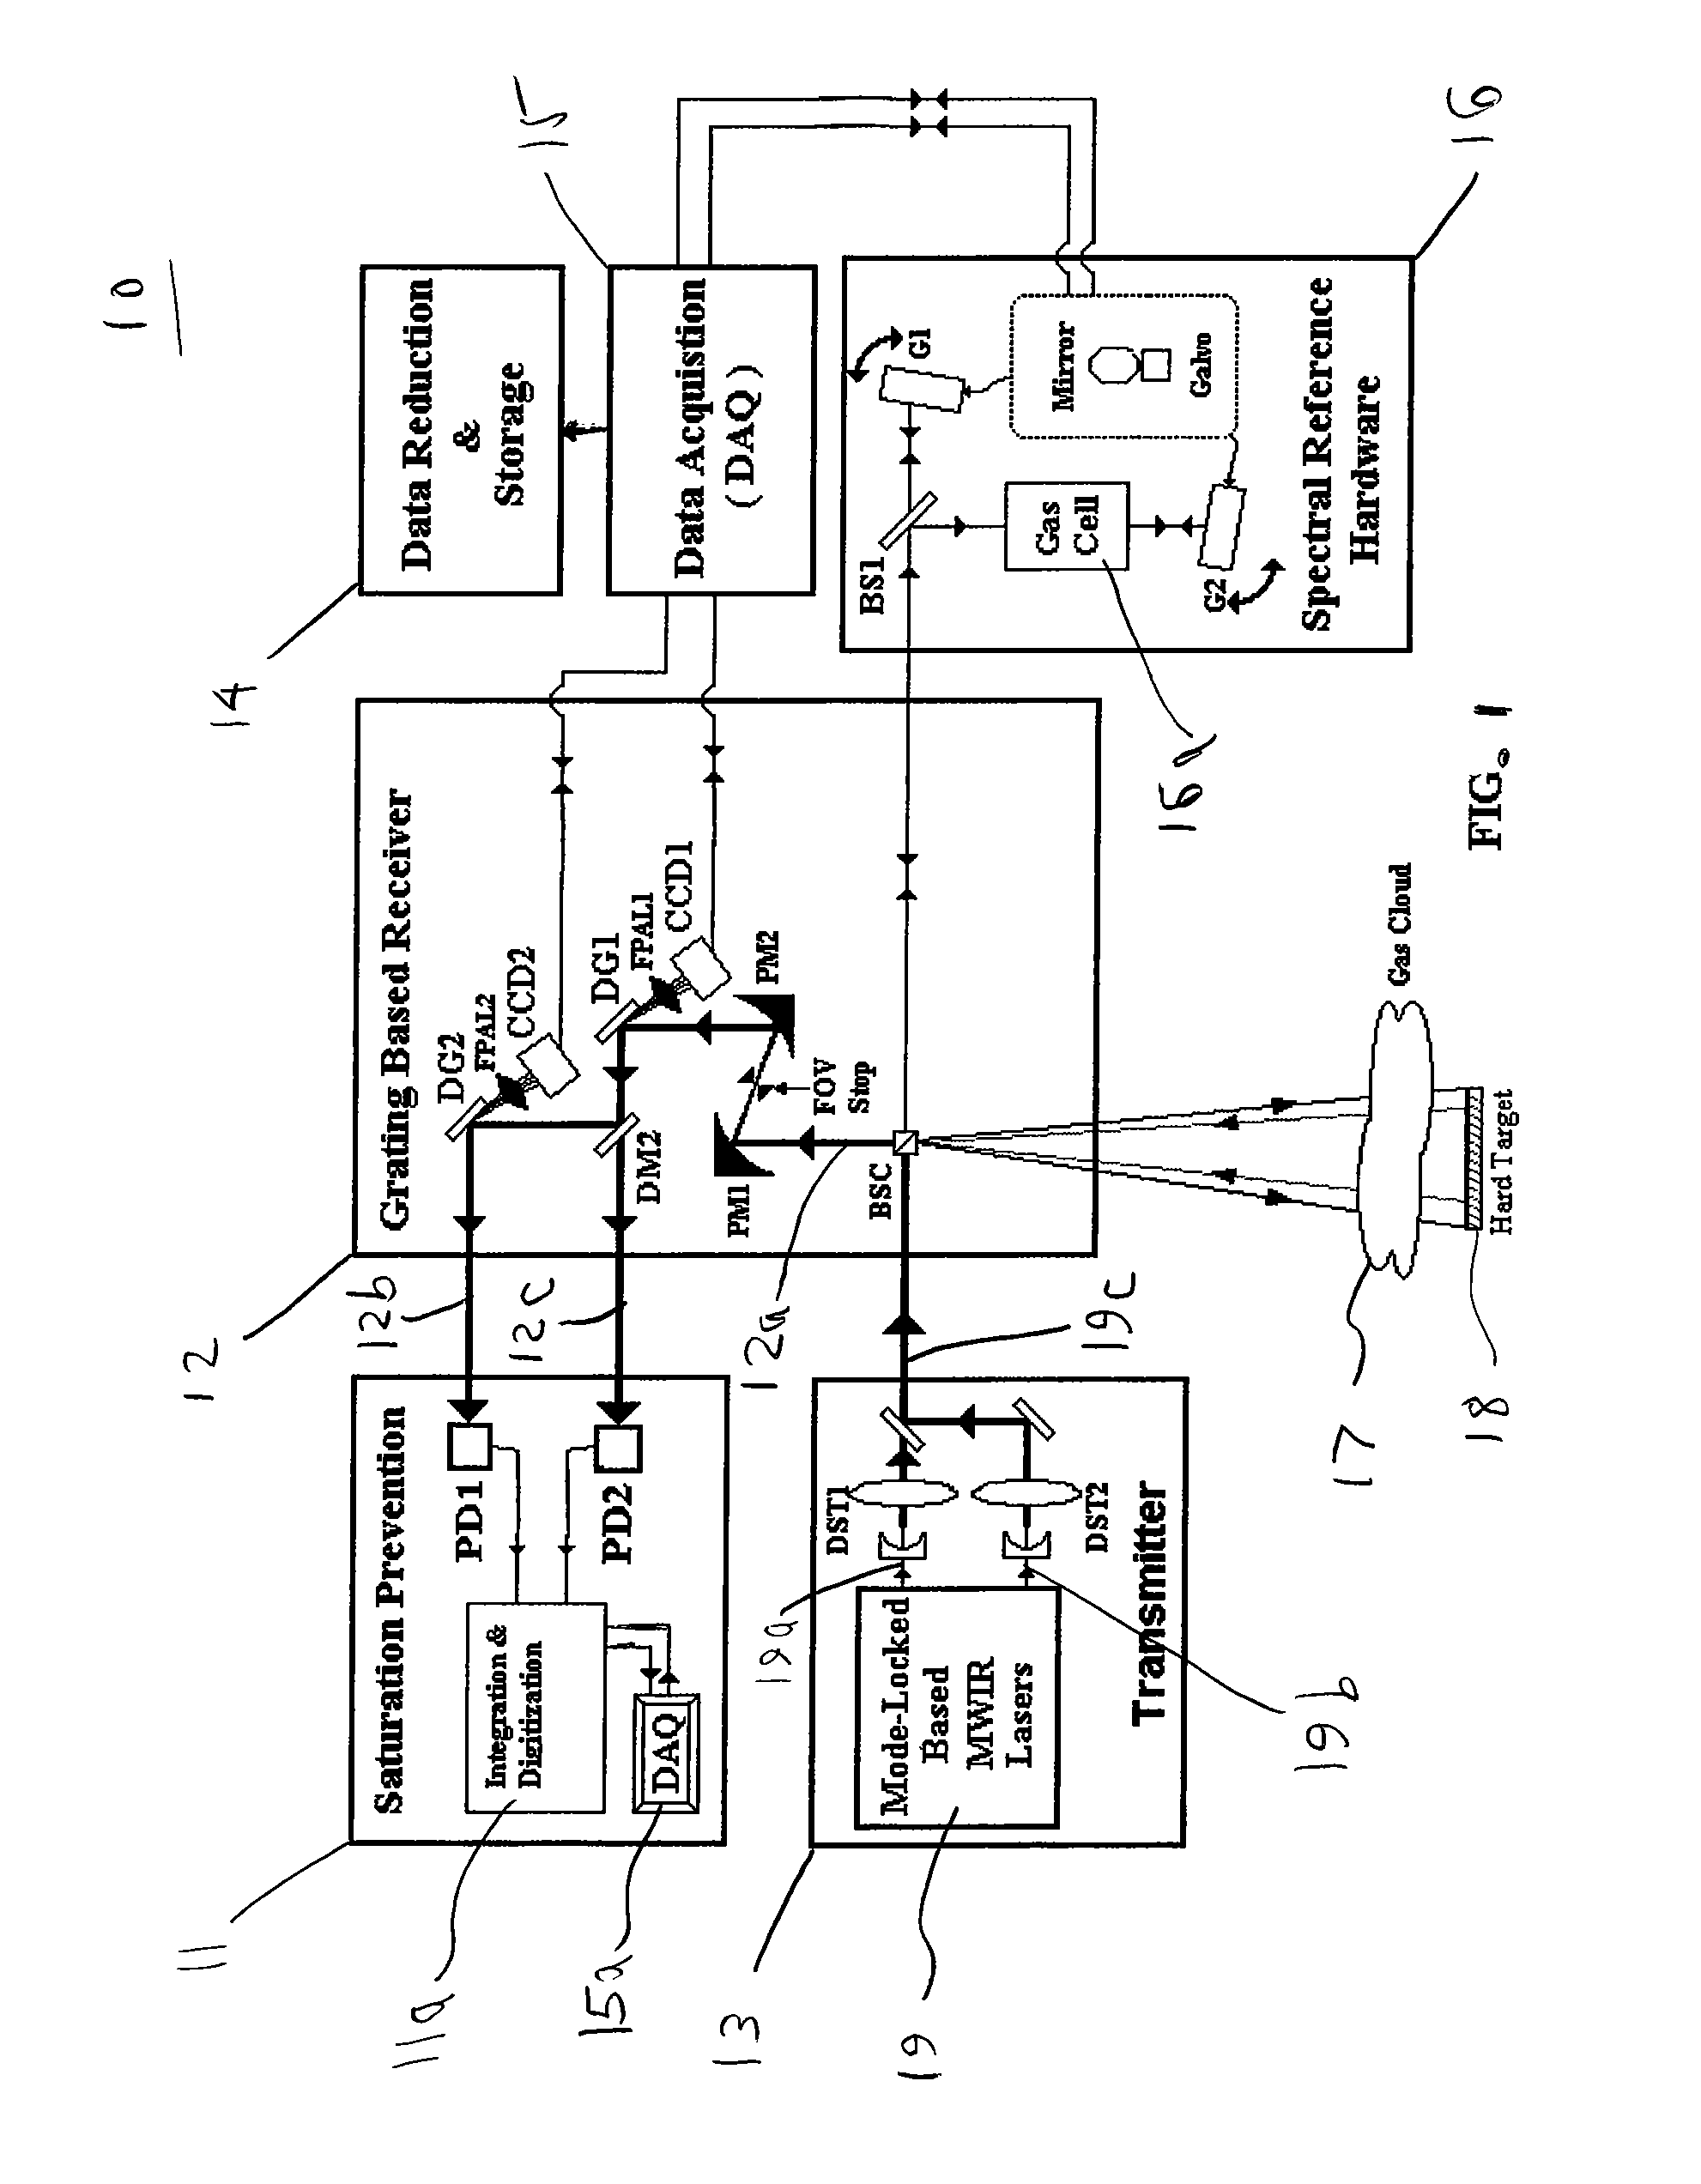 System and method for simultaneous detection of a gas using a mode-locked based transmitter